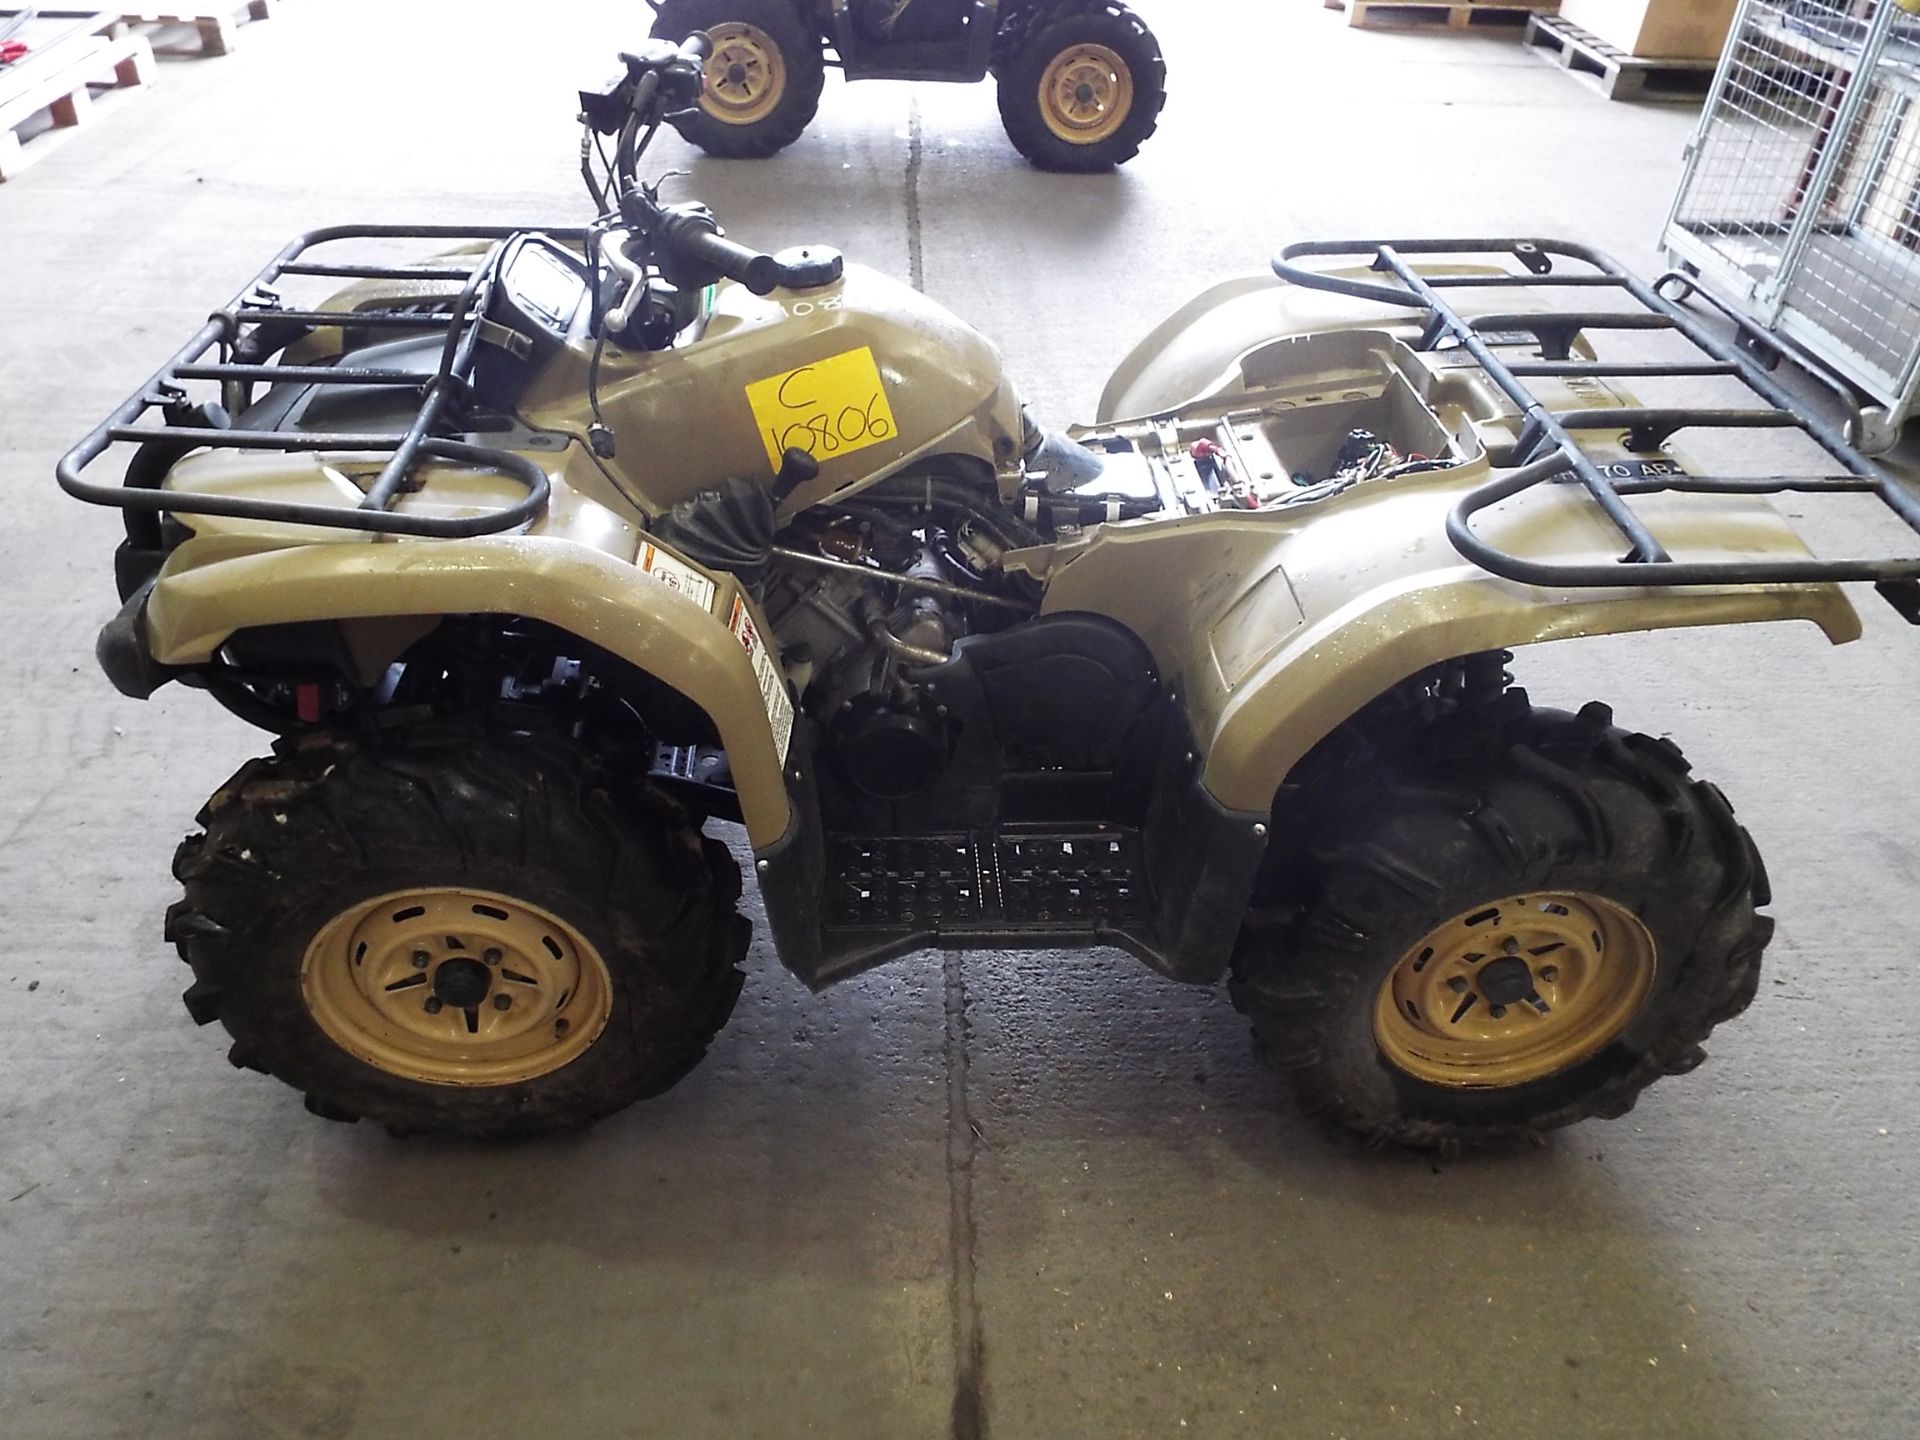 Military Specification Yamaha Grizzly 450 4 x 4 ATV Quad Bike Complete with Winch - Image 4 of 18